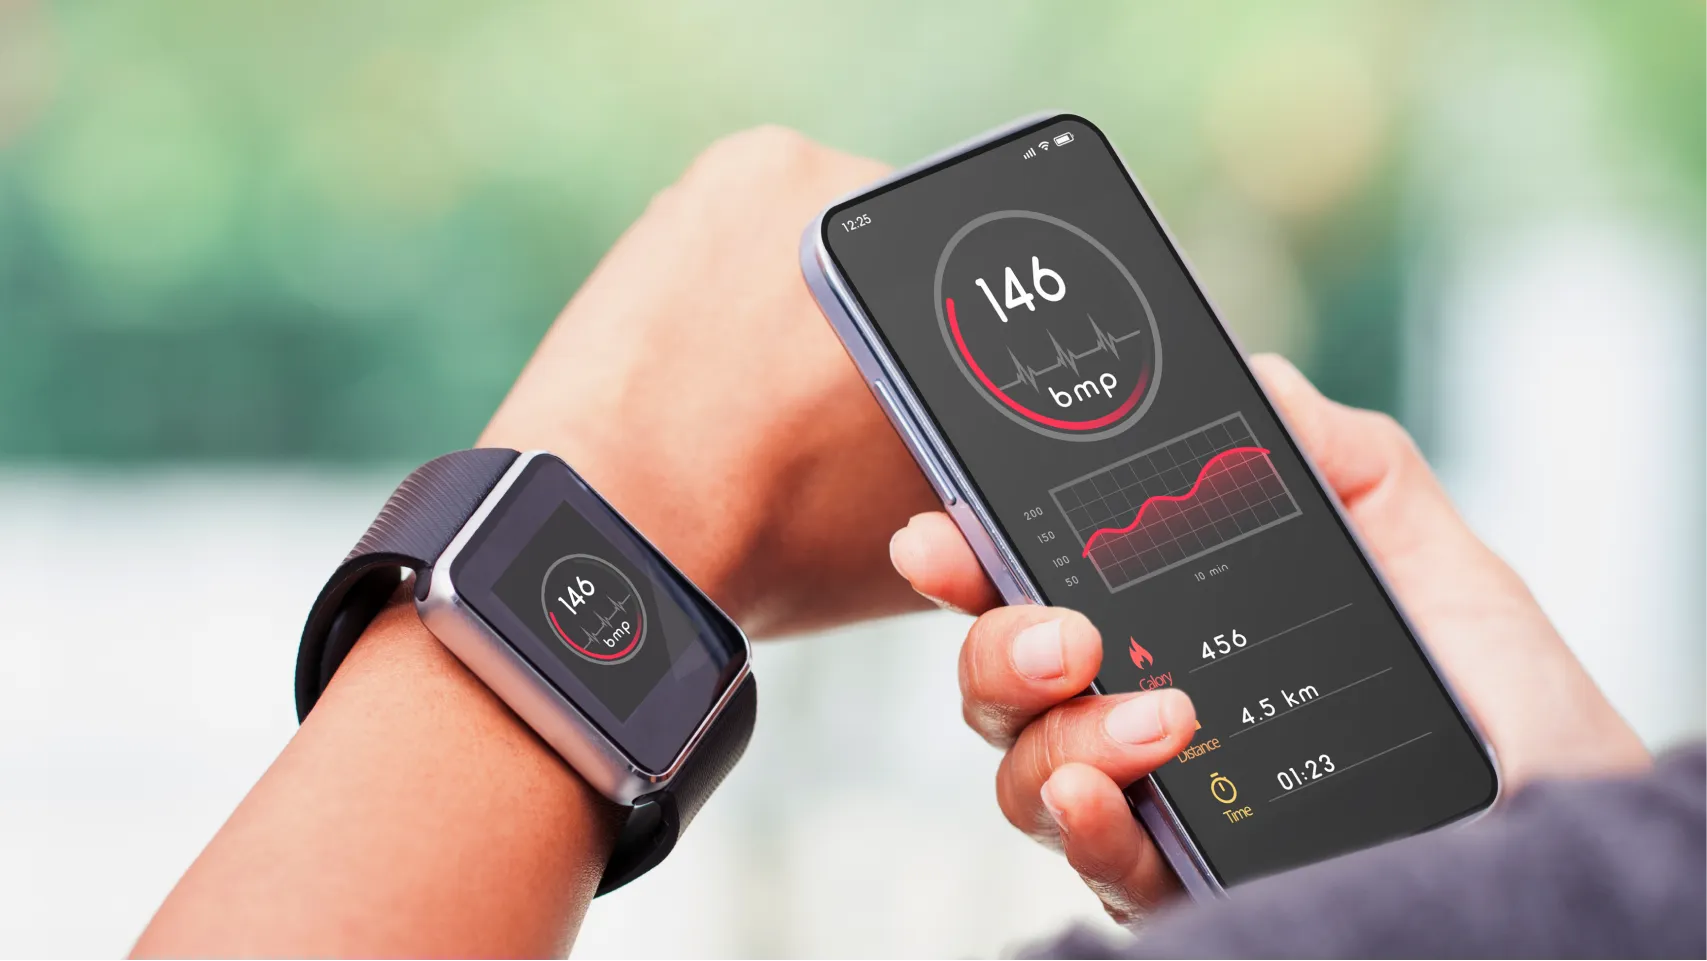 A person tracks their basic metabolic panel by synching their watch and phone.